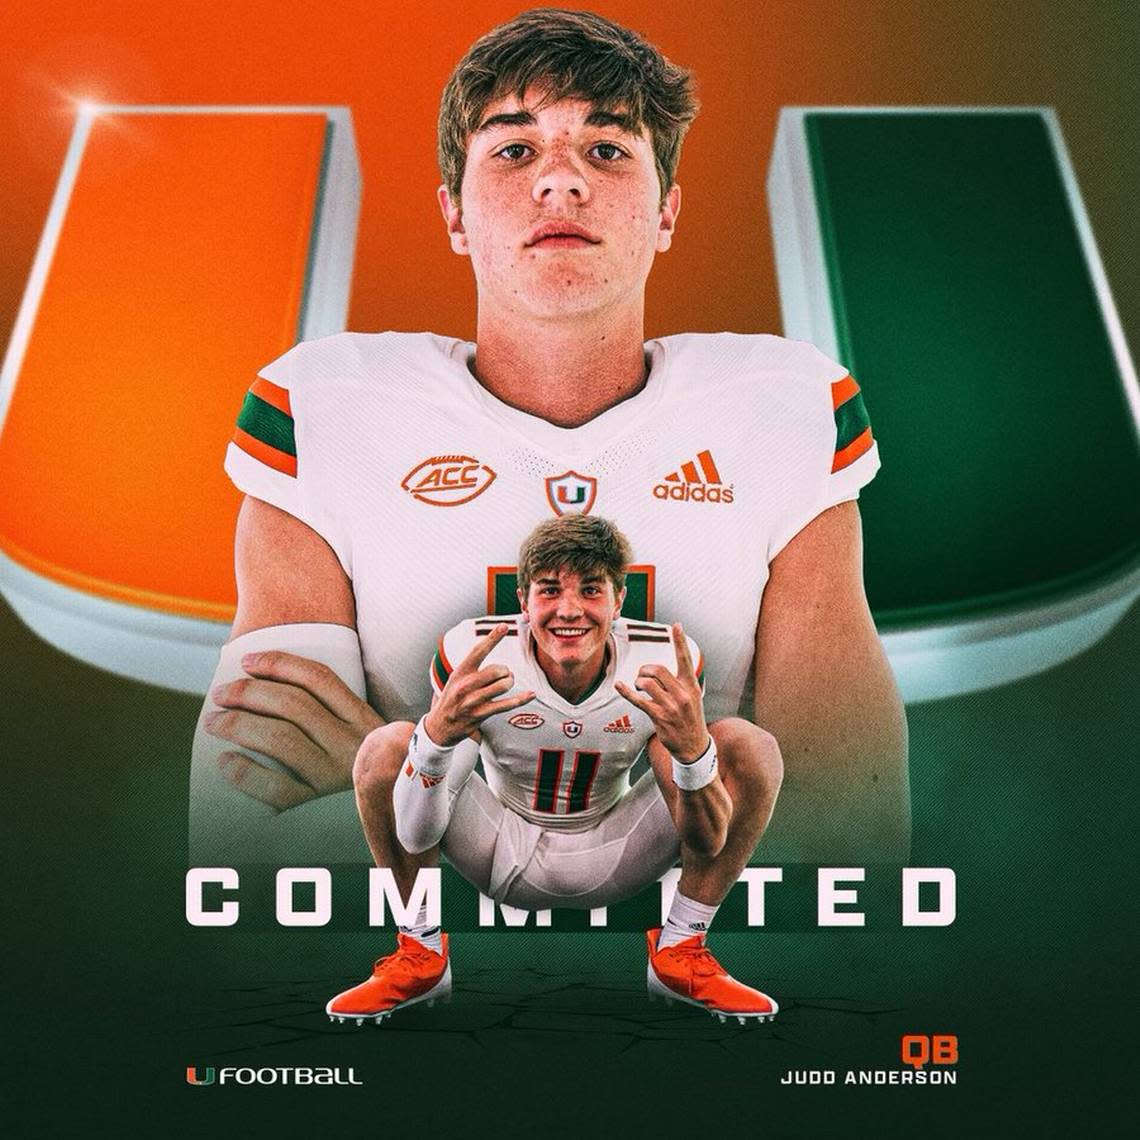 Miami Hurricanes quarterback for Class of 2024 commits to the U. He’s 6